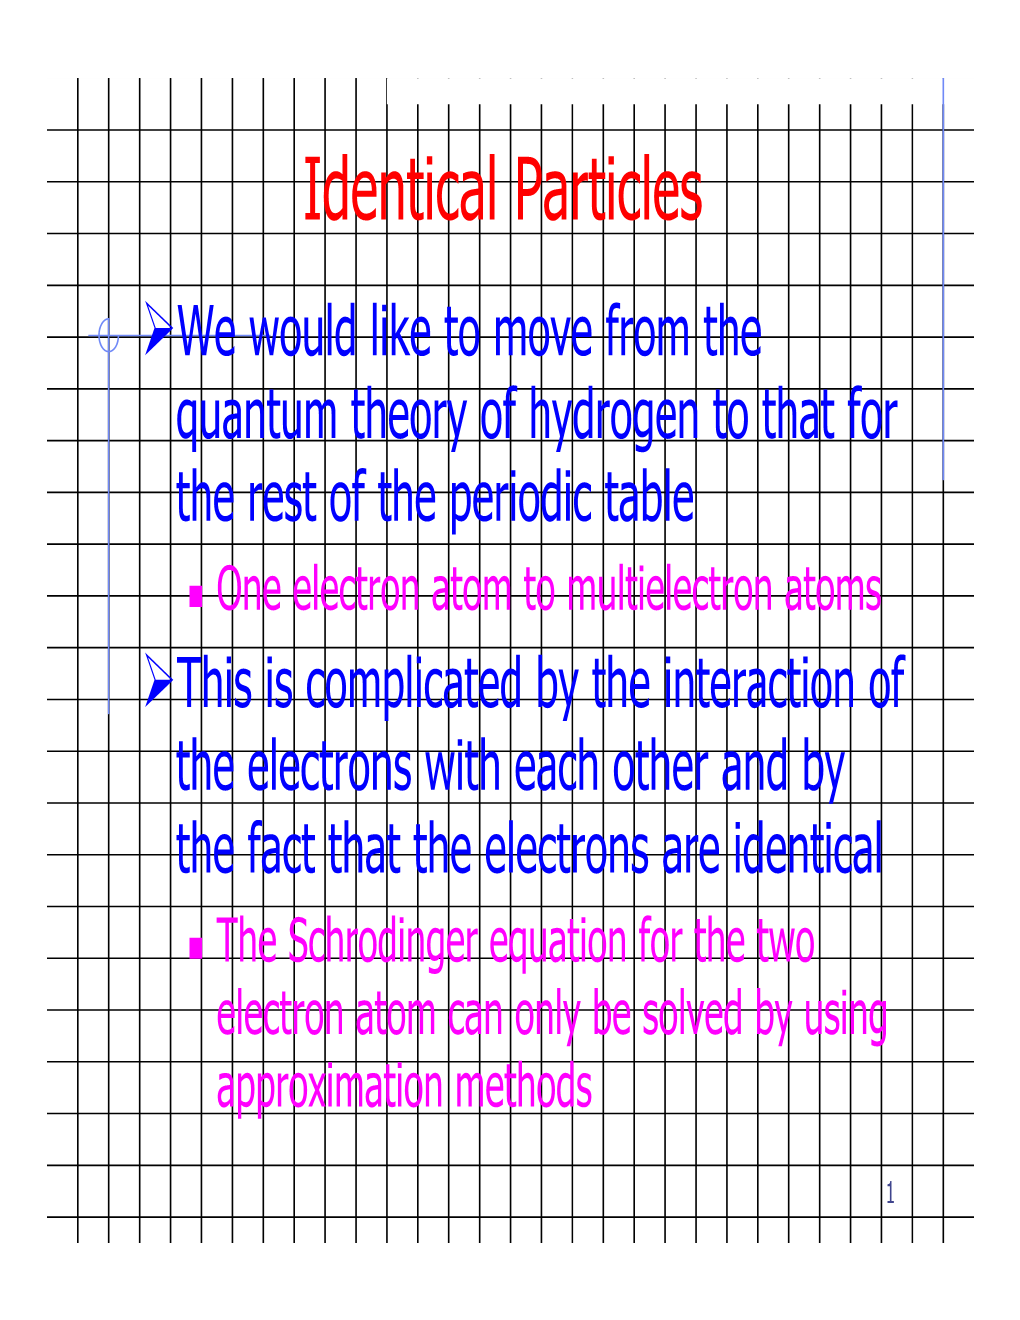 Identical Particles ¾We Would Like to Move from the Quantum Theory of Hydrogen to That for the Rest of the Periodic Table